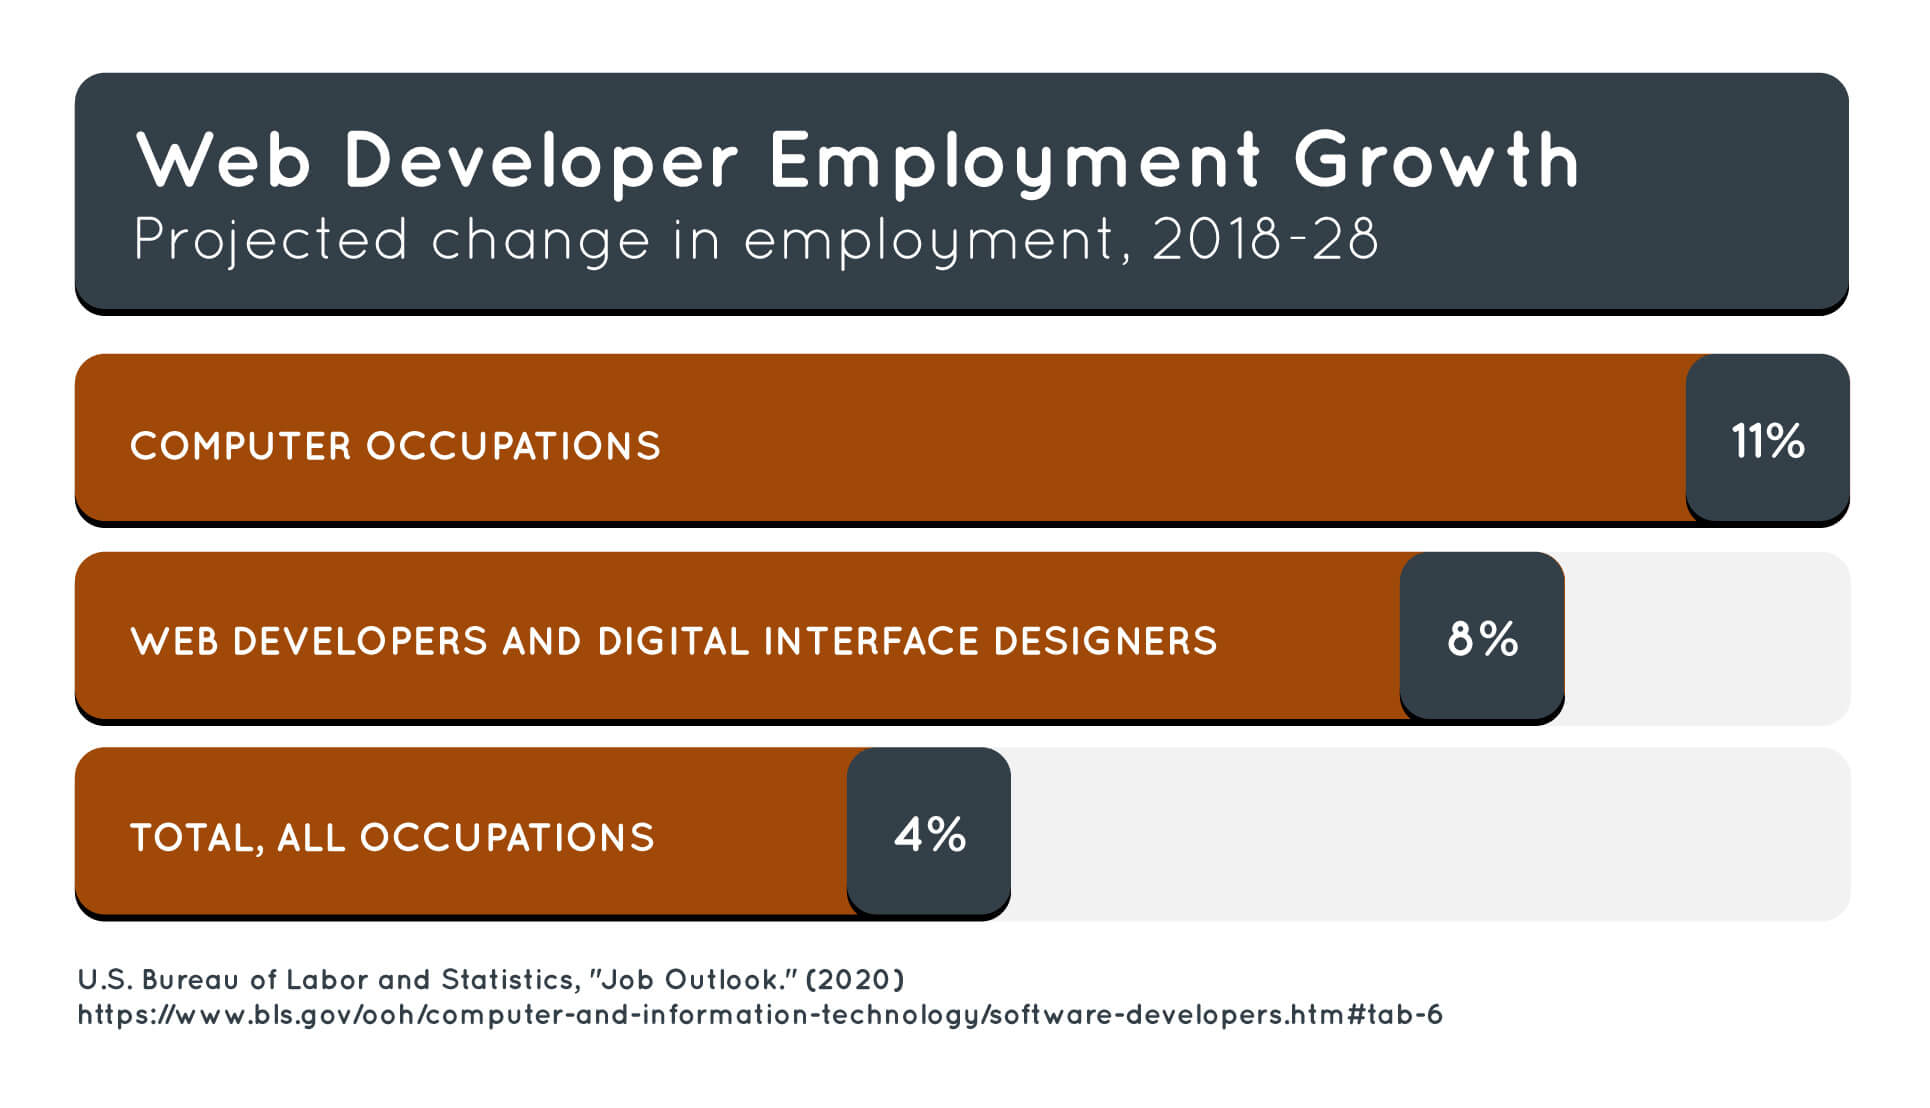 A chart showing the projected web developer employment growth